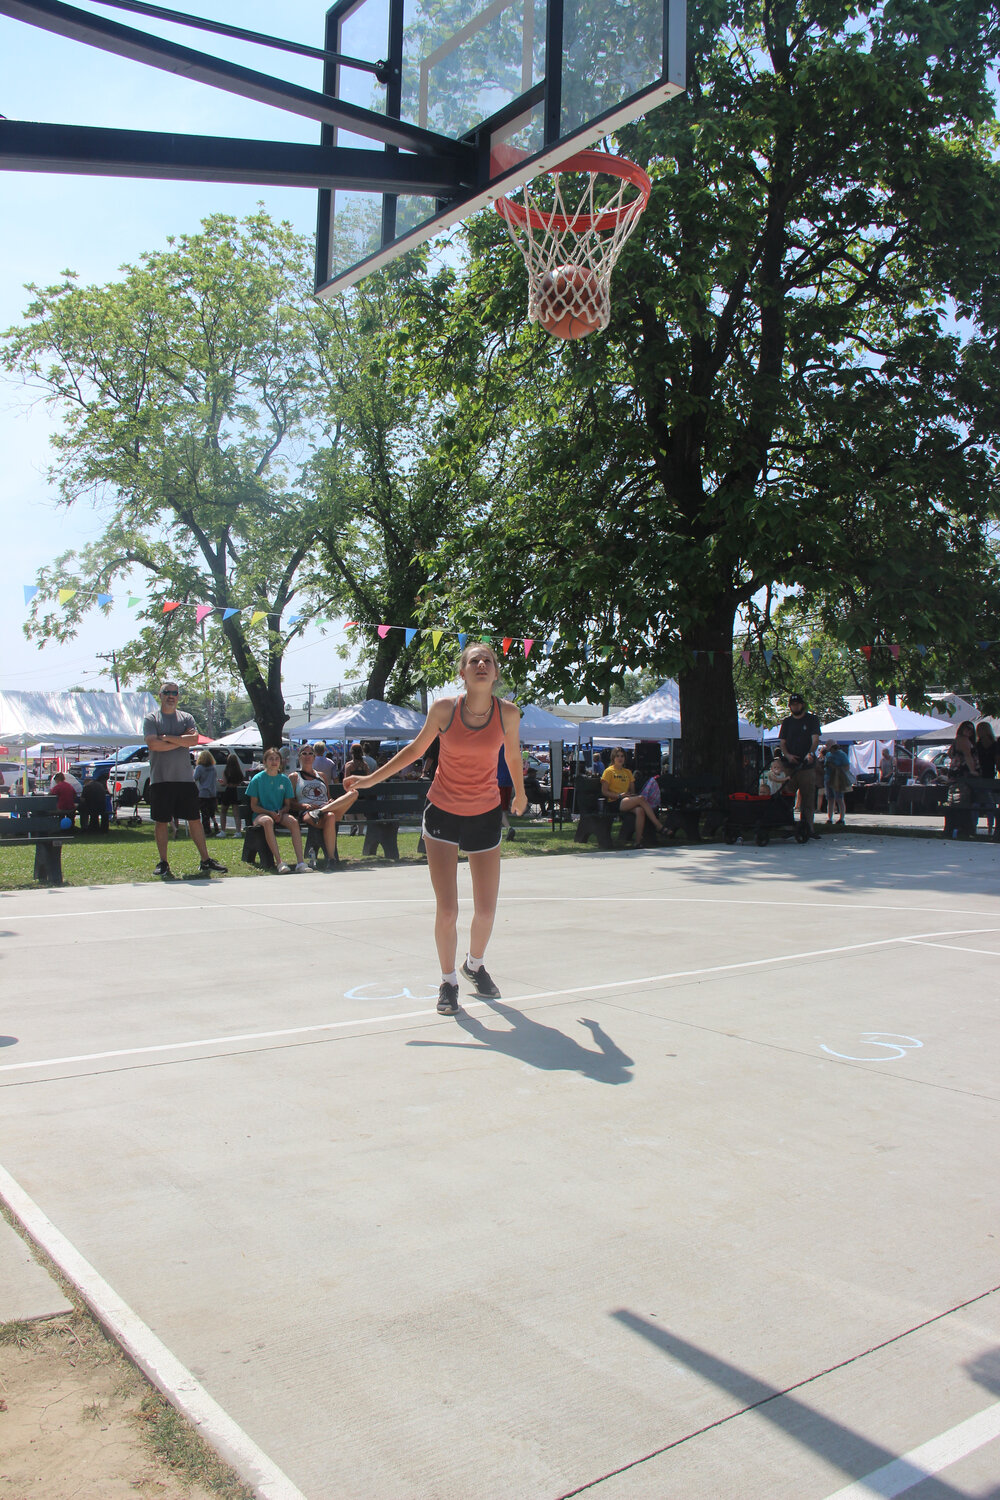 Makenna Faubion was the first person to hit the basketball court during the Hot Shots competition at Summerfest in Truesdale on June 3.